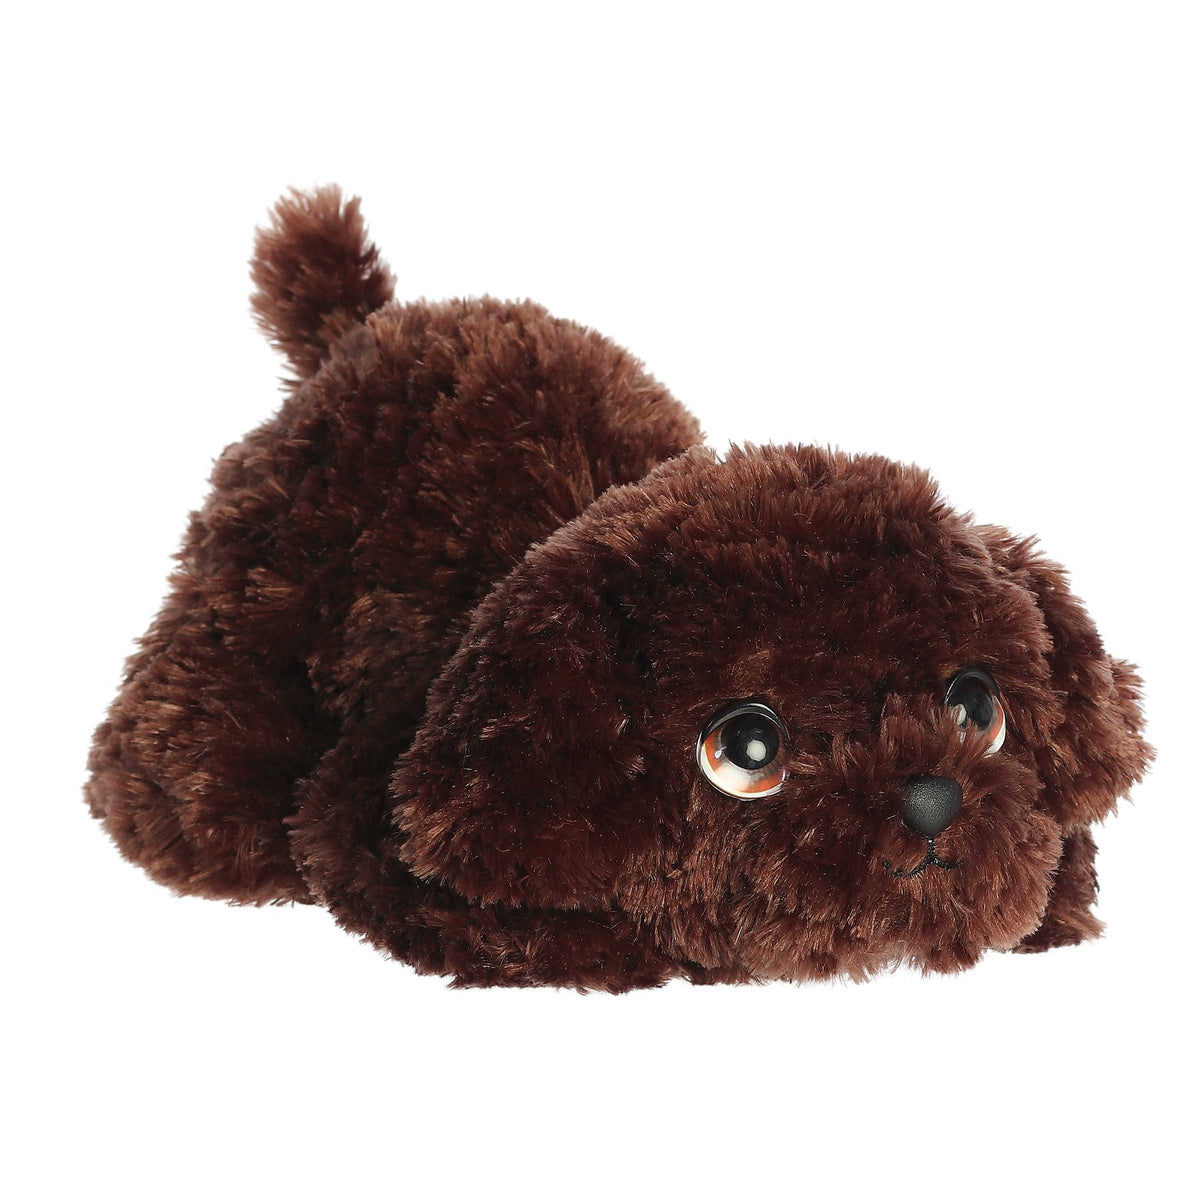 Chocolate Lab plush with head down, tail up, and big, affectionate brown eyes, crafted for lasting play and cuddles.